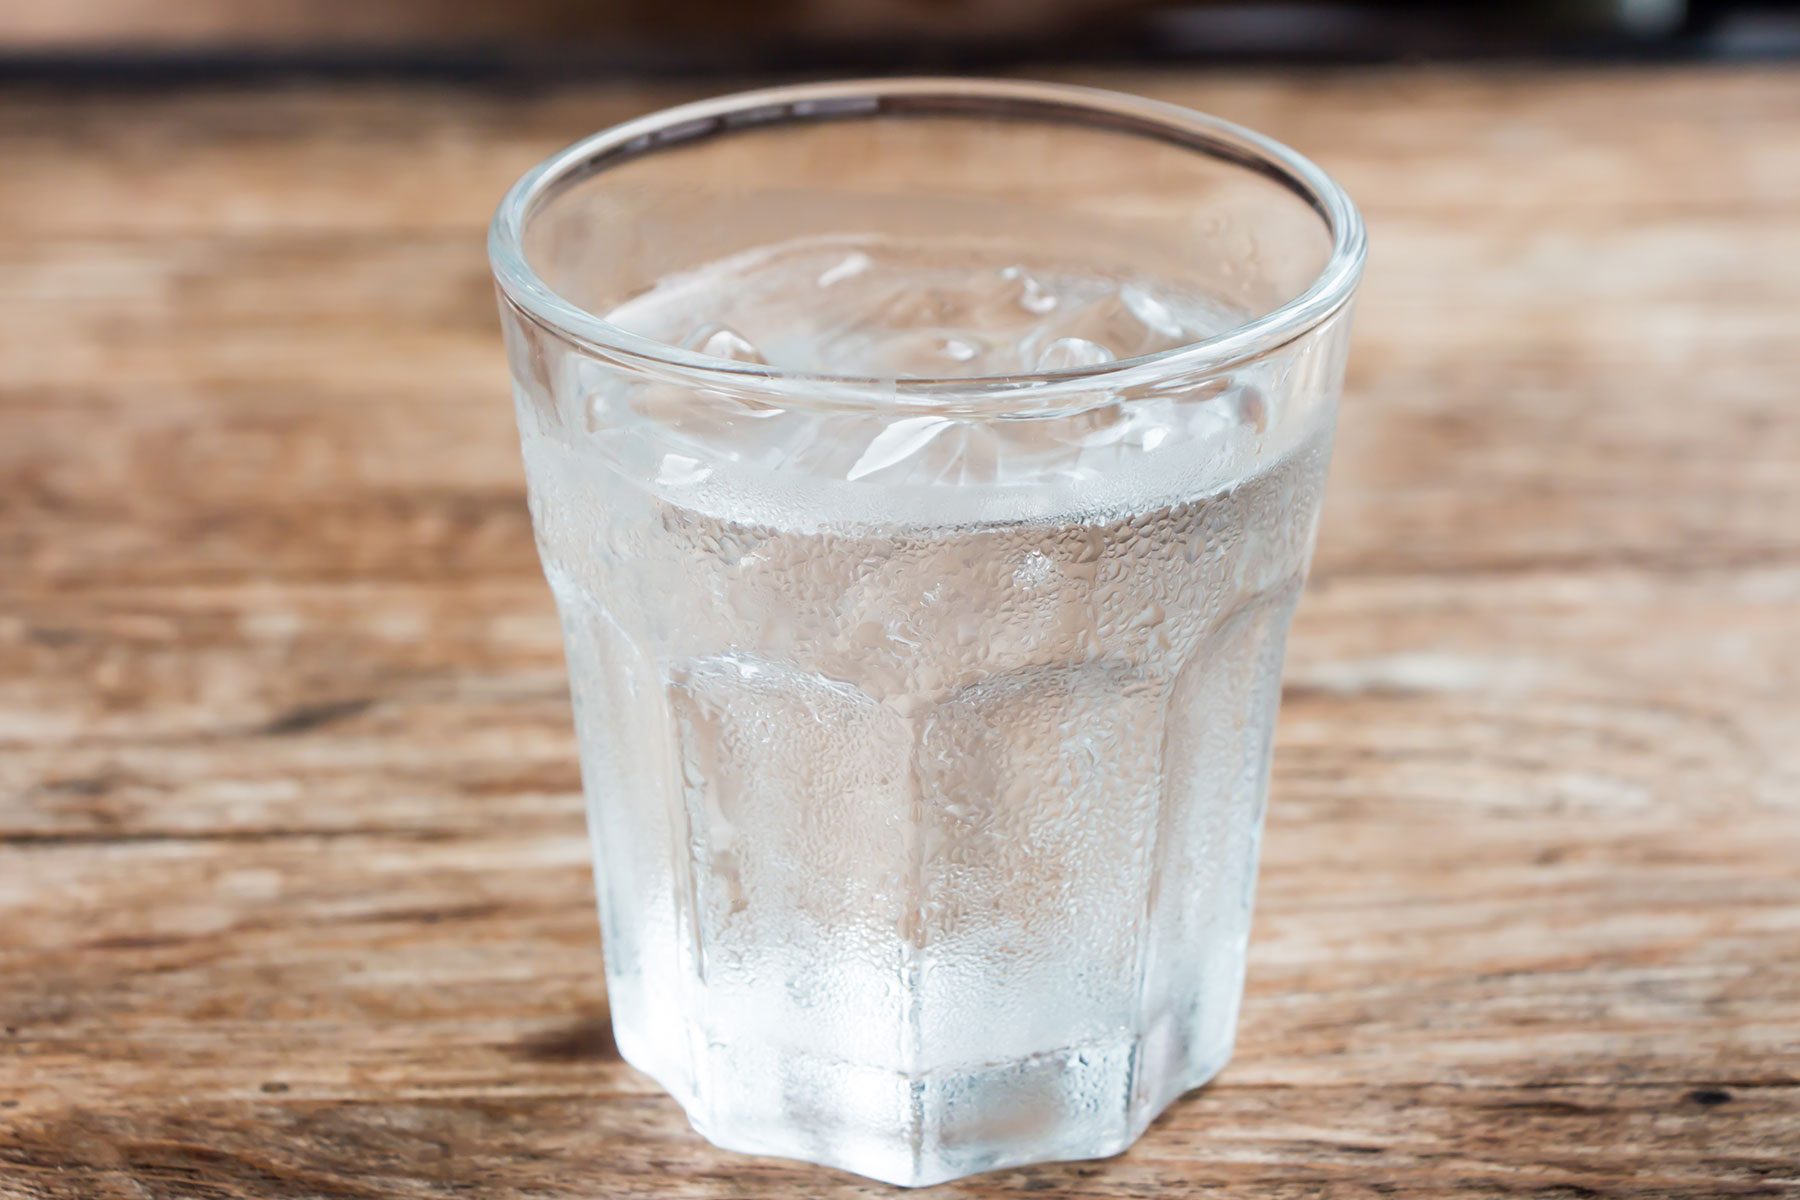 https://www.tasteofhome.com/wp-content/uploads/2023/06/Getty-590048640-Resize-Crop-DH-TOH-Why-Does-Cold-Water-Taste-Better.jpg?fit=700%2C1024